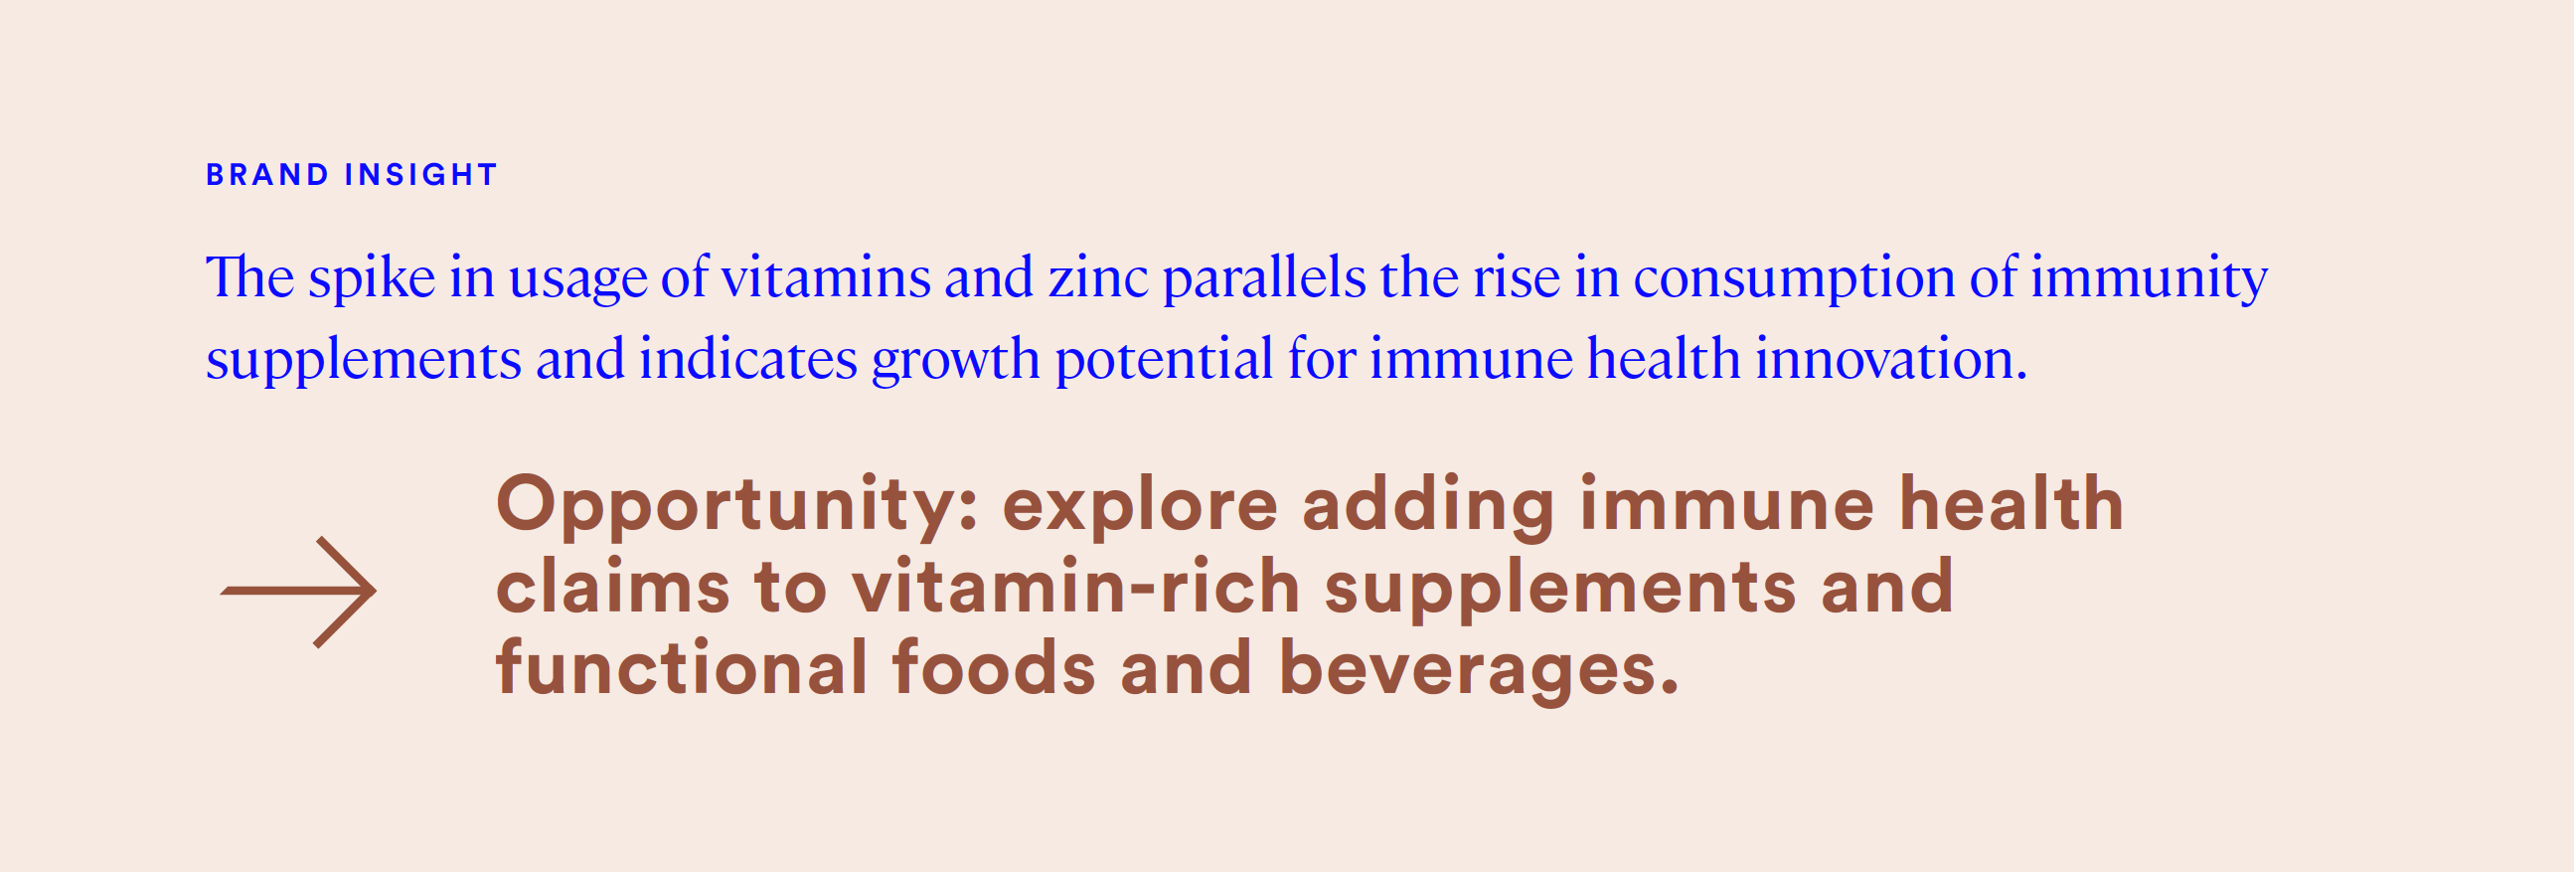 the spike in usage of vitamins and zinc parallels the rise in consumption of immunity supplements and indicates growth potential for immune health innovation.